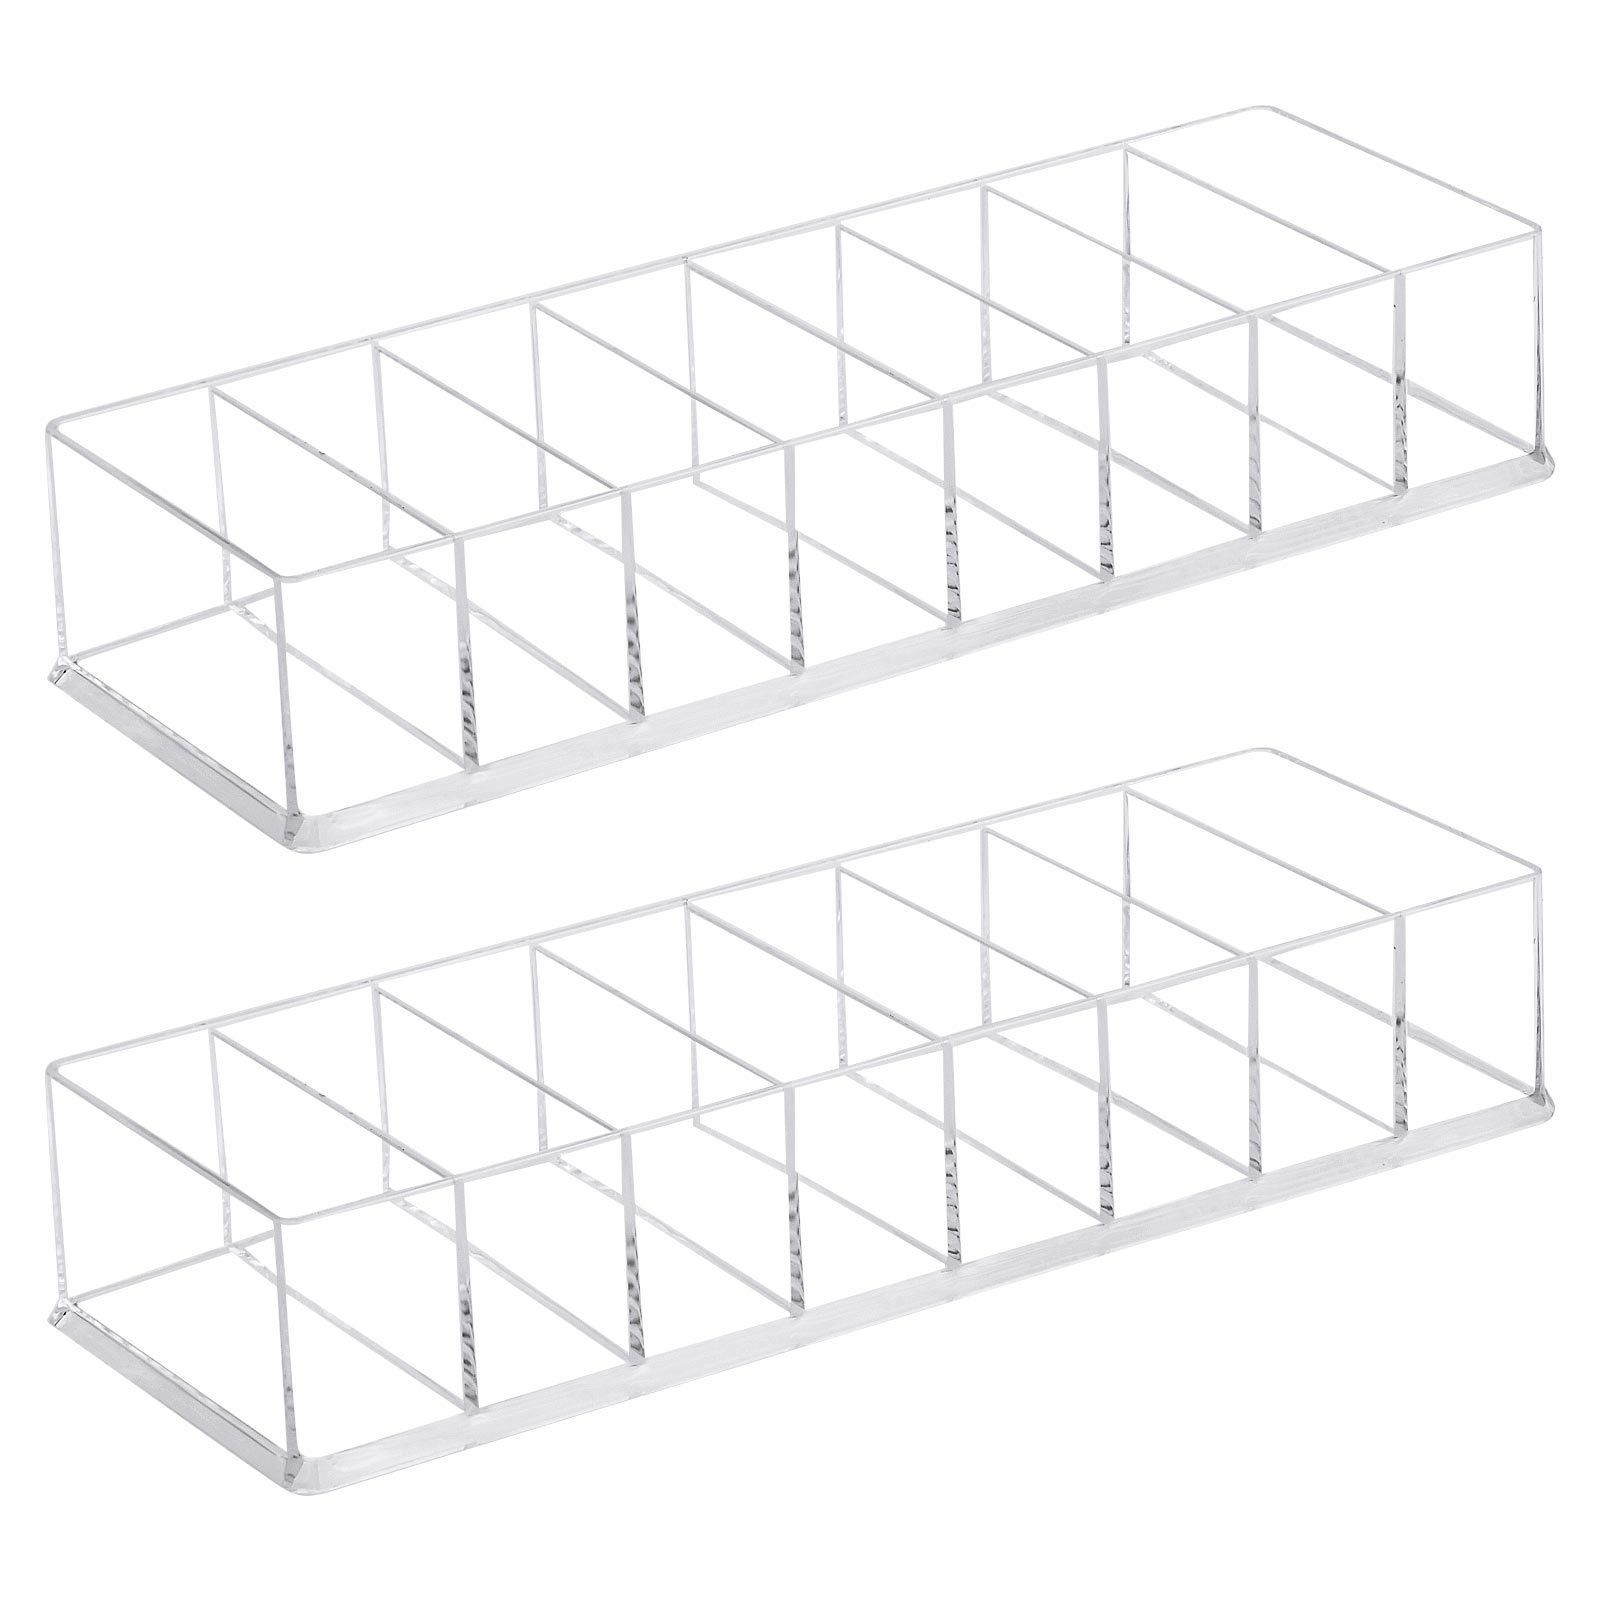 

2pcs Make Up Organizer Cosmetic Lipstick Storage Organiser Clear Nail Polish Container Makeup Holder Display Transparent Dressing Table Box 8 Grids Beauty Case For Bathroom Bedroom (7.5 * 2.7cm/grid)